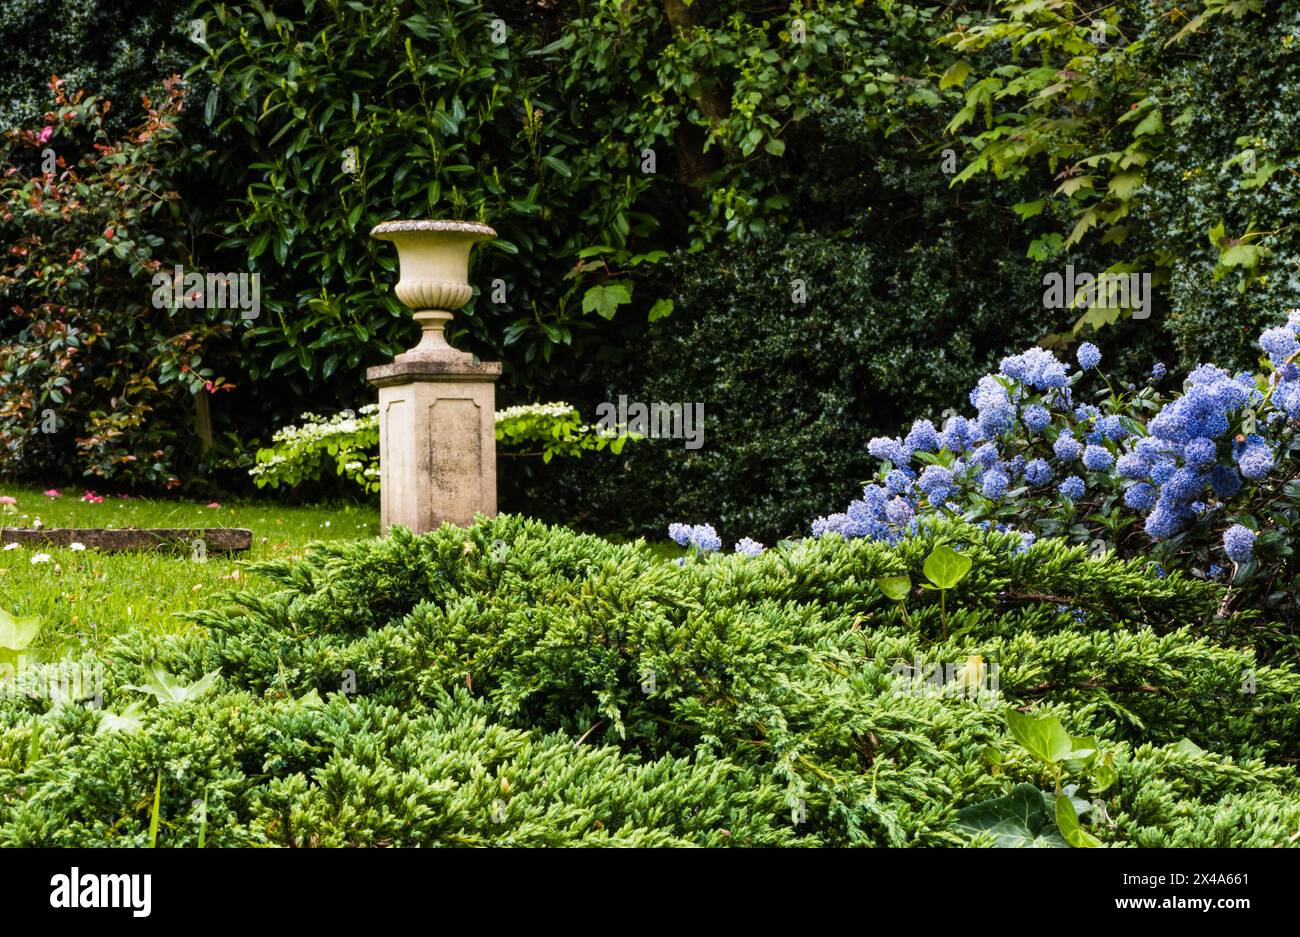 A Country Garden with a Ceonothus thyrsiflorus var. repens in the foreground. Stock Photo